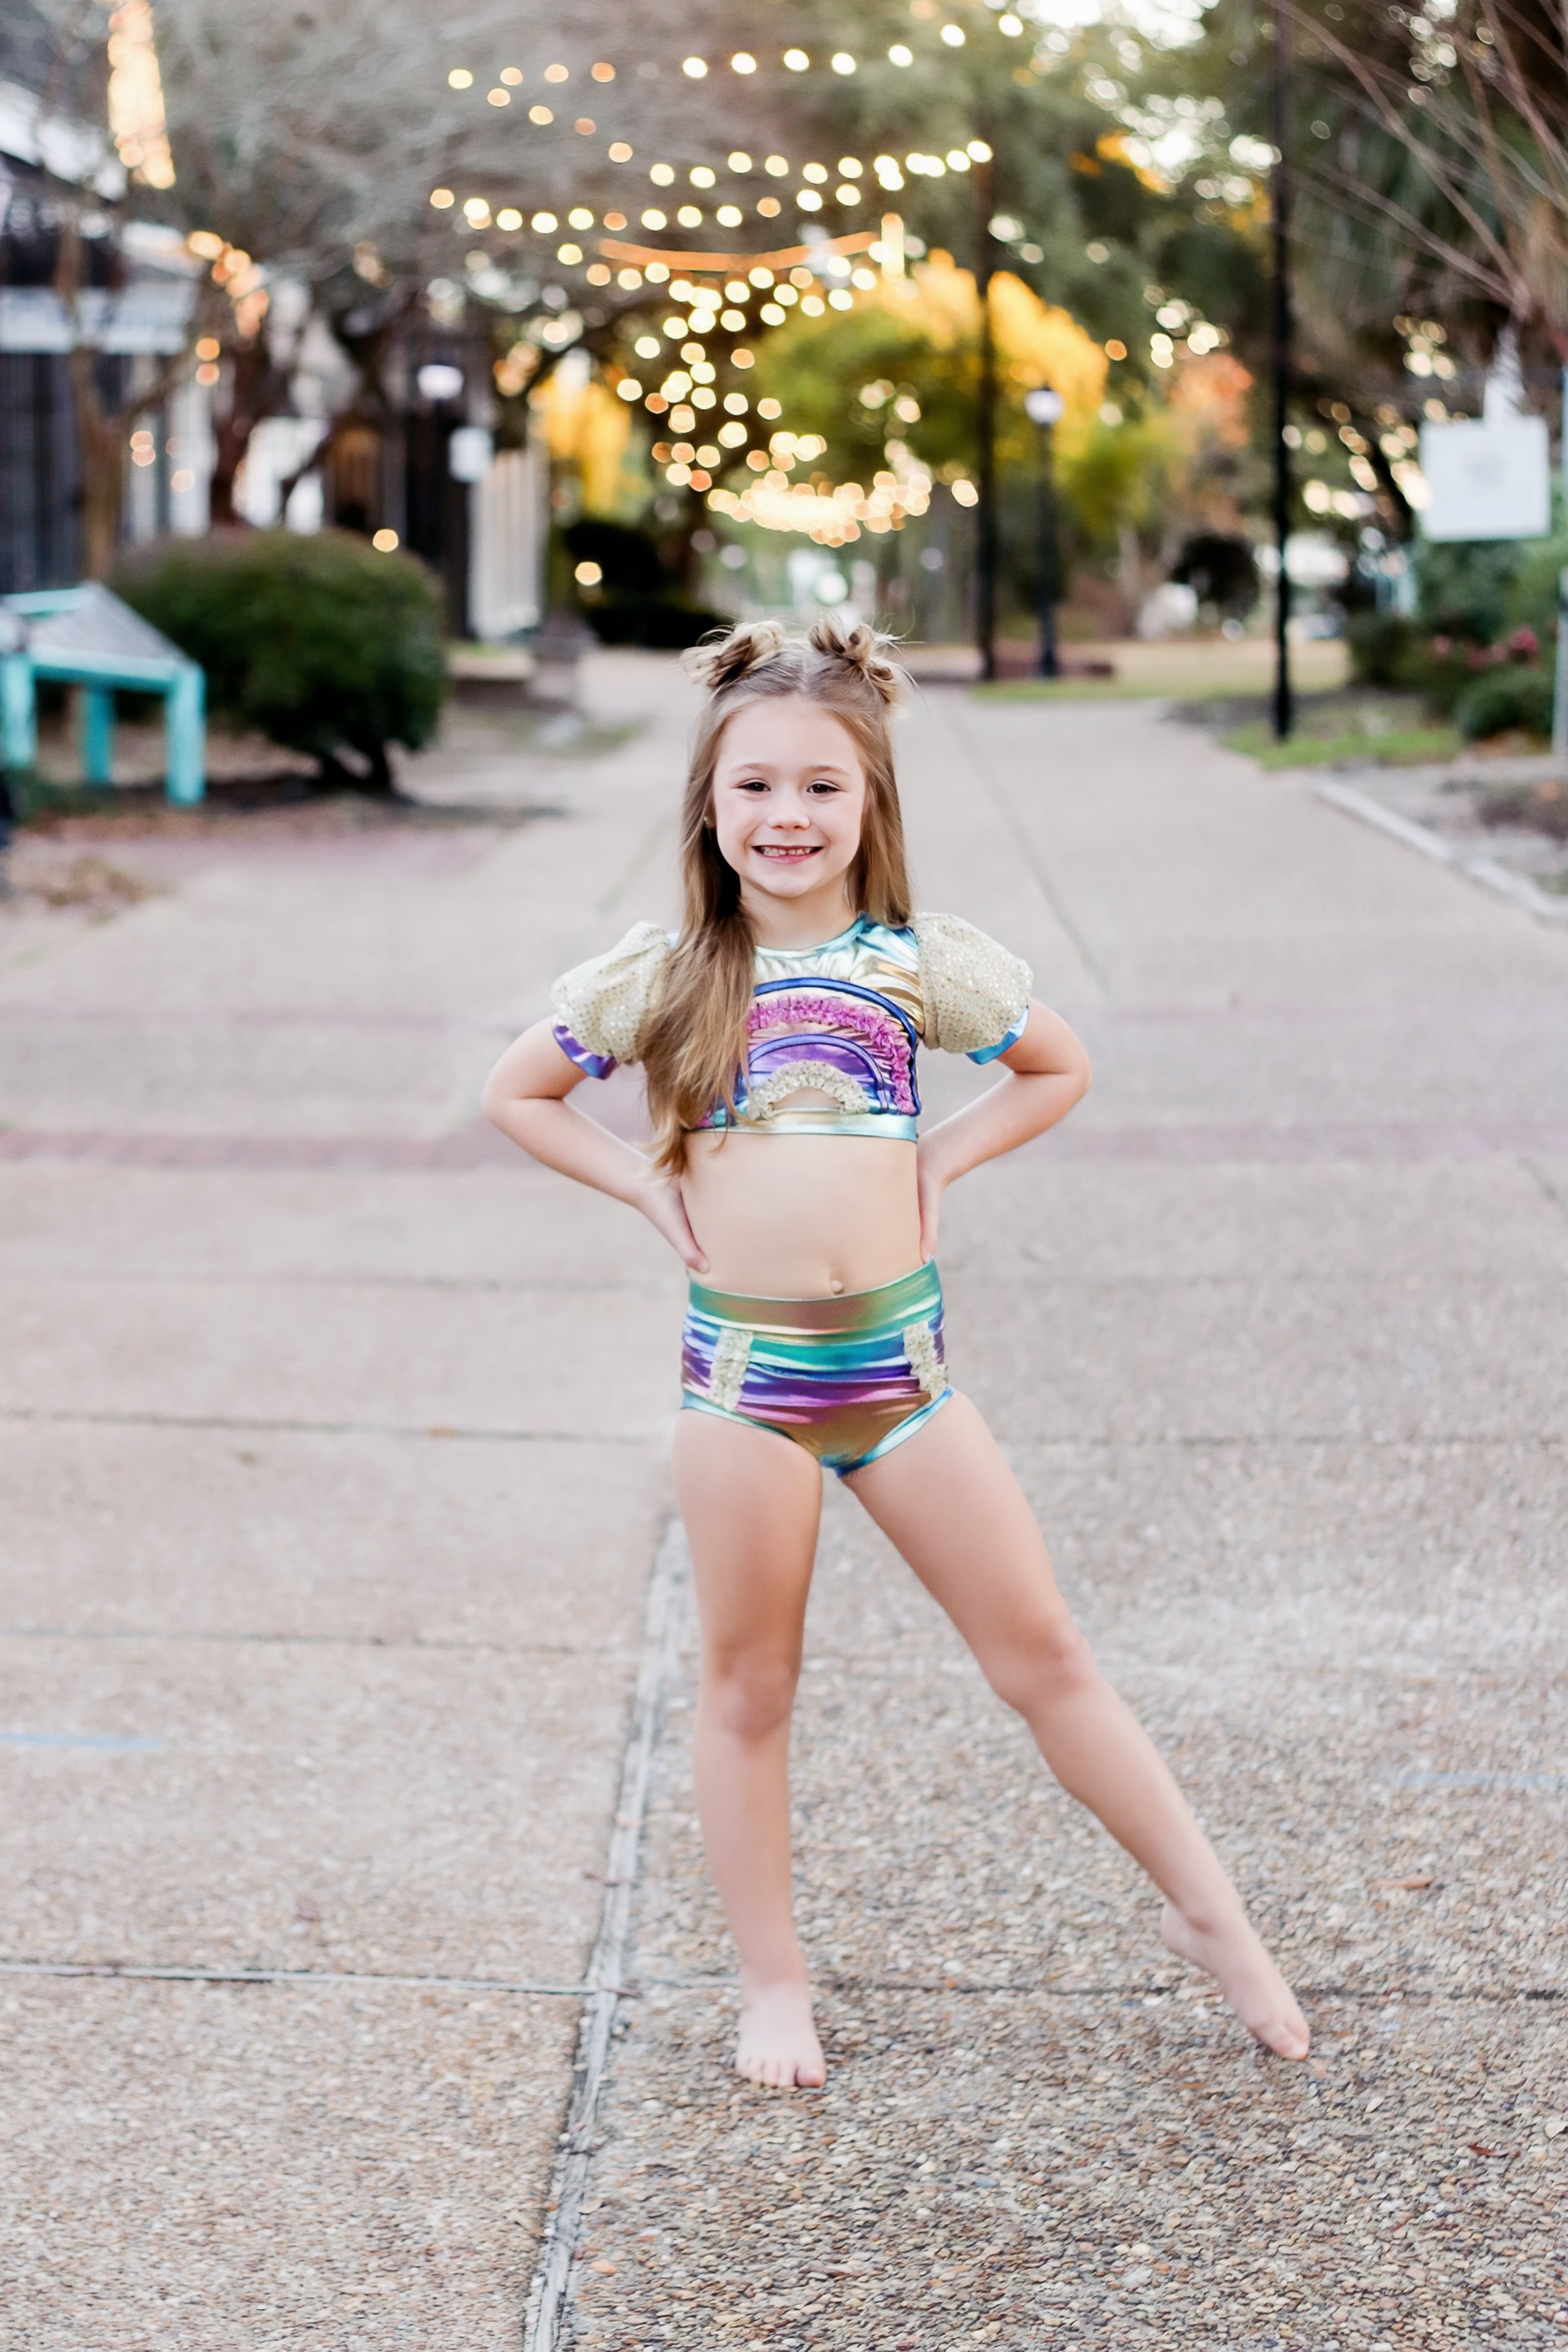 Made to Shine Metallic Multicolored Rainbow Detail Dance Top and Brief Set